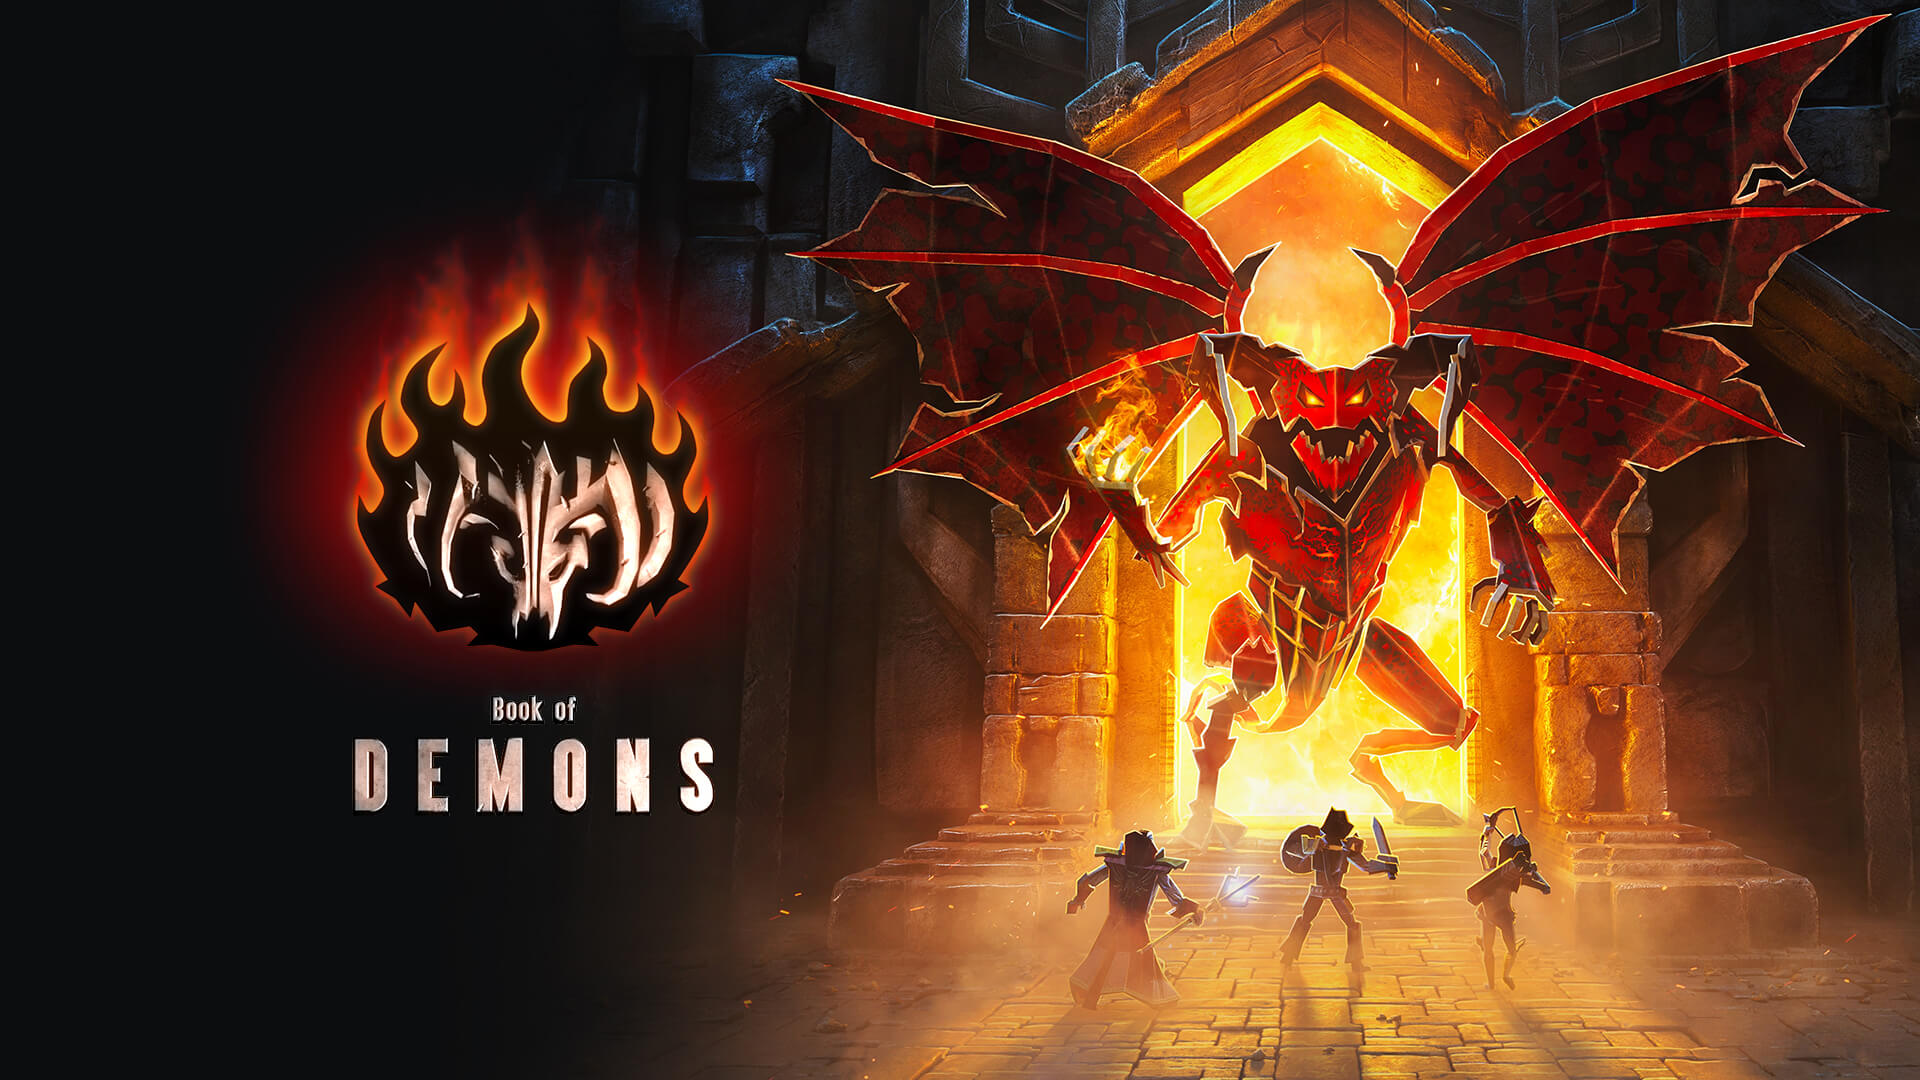 Book of Demons for mac download free